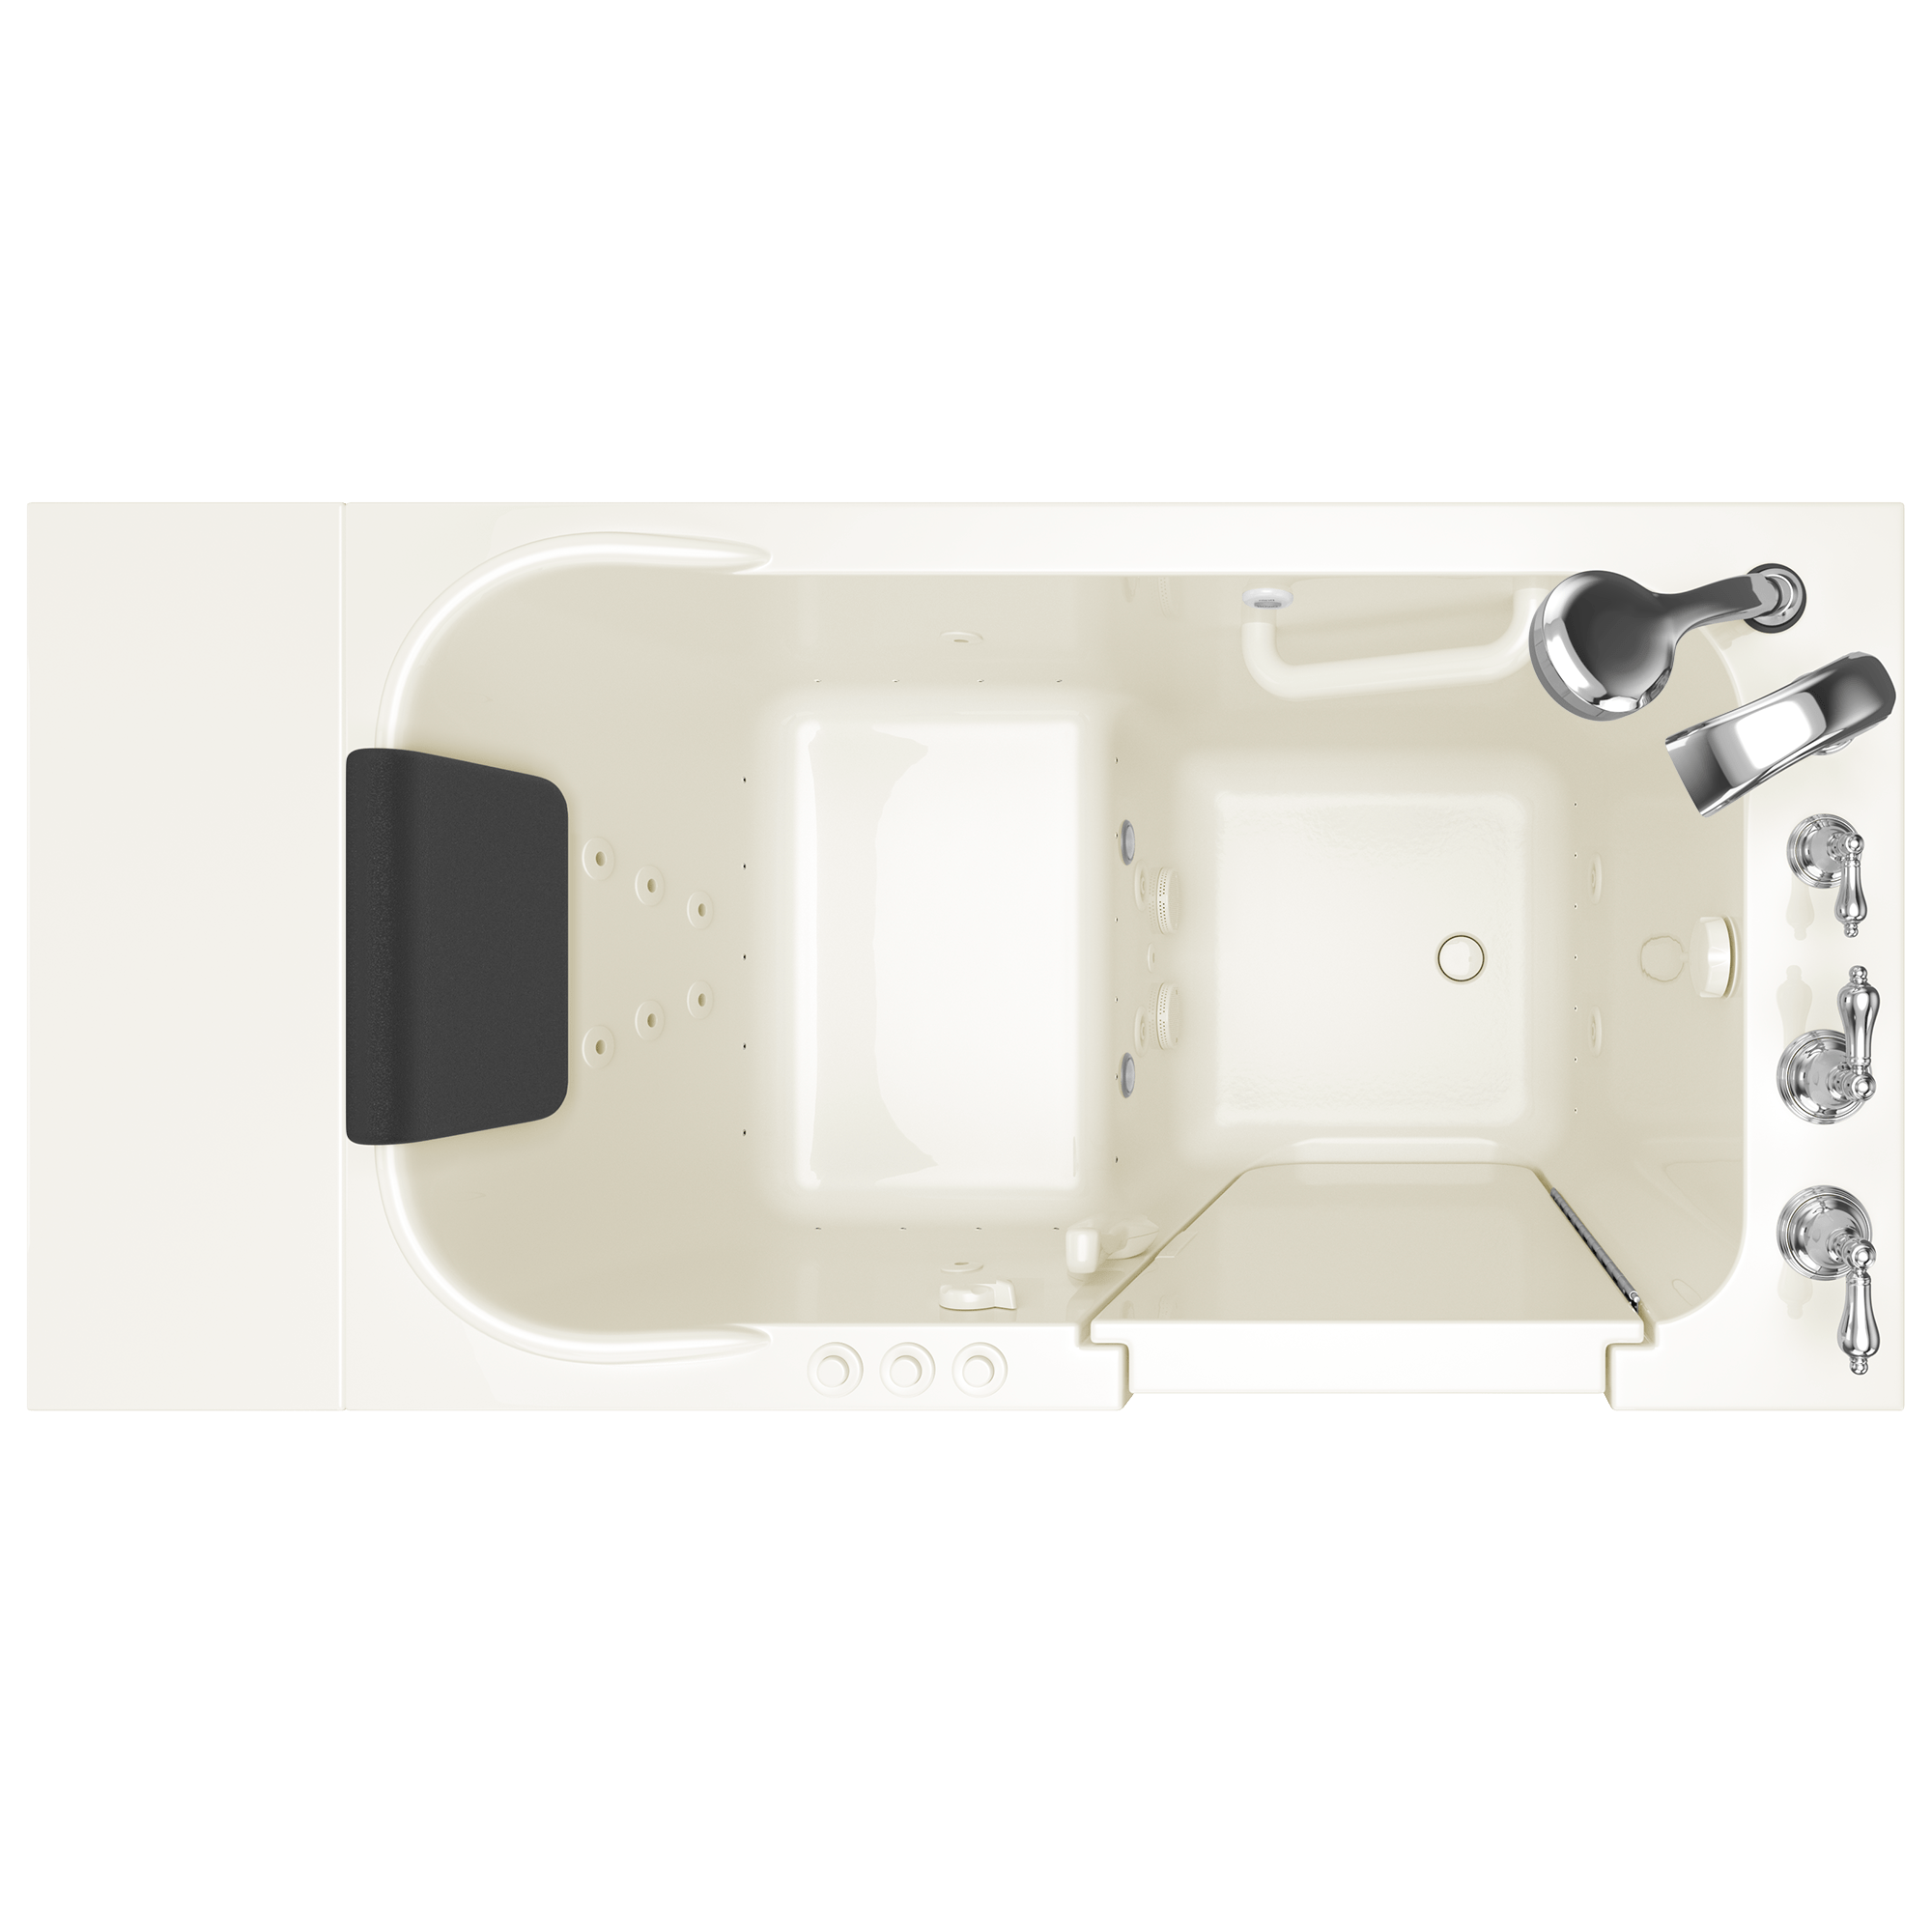 Gelcoat Premium Series 28 x 48-Inch Walk-in Tub With Combination Air Spa and Whirlpool Systems - Right-Hand Drain With Faucet